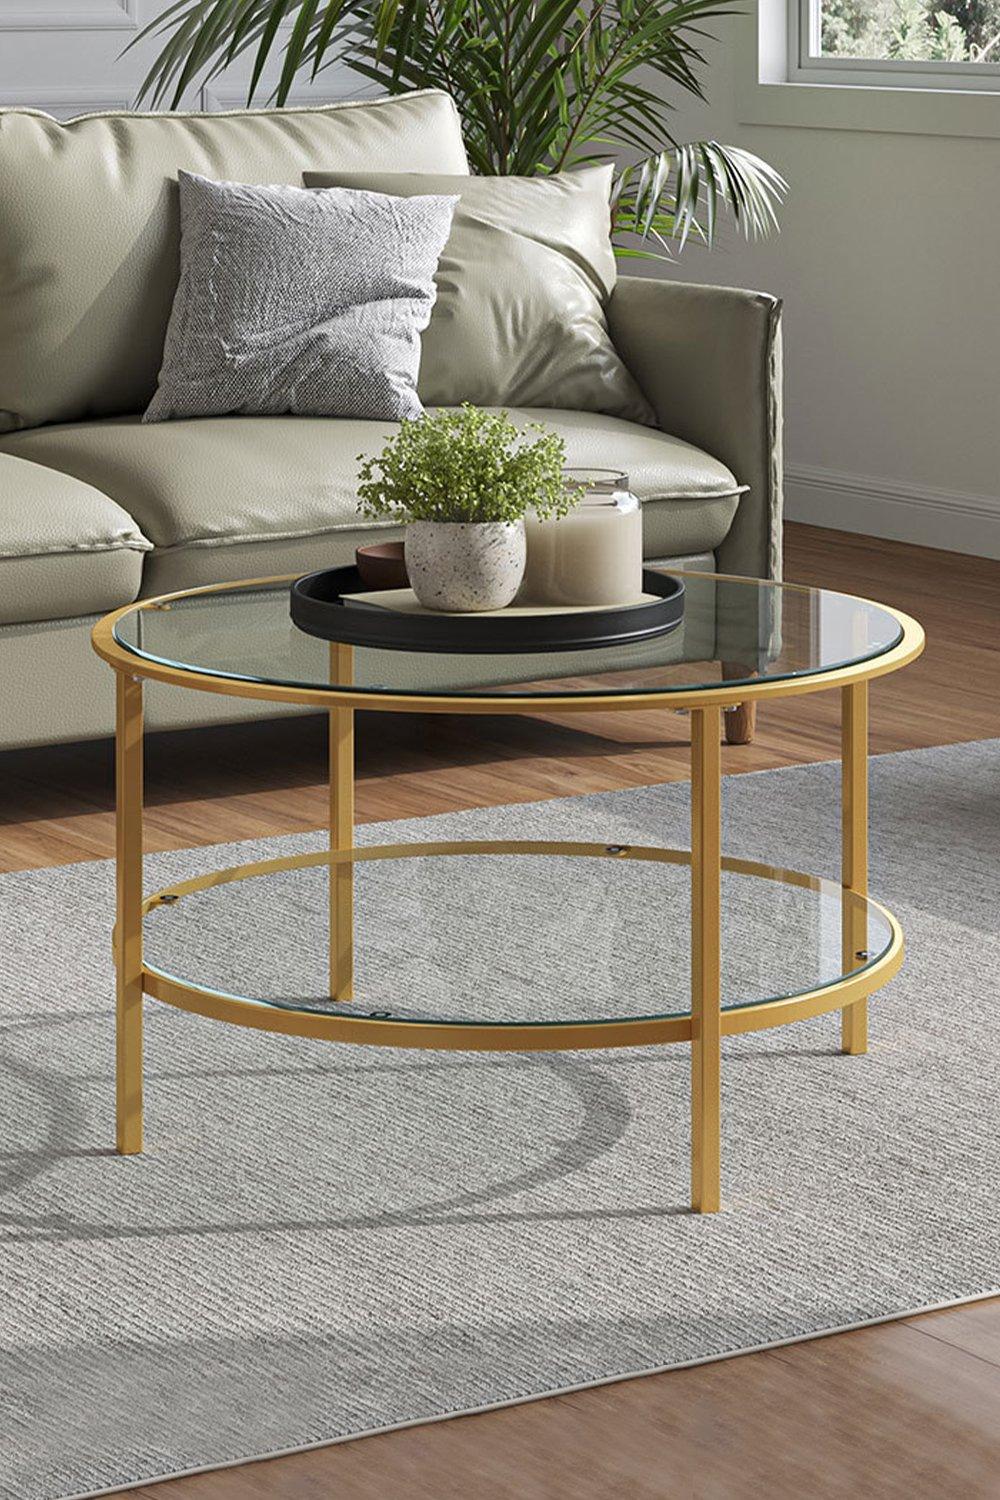 2 Tier Round Glass Coffee Table Side Table